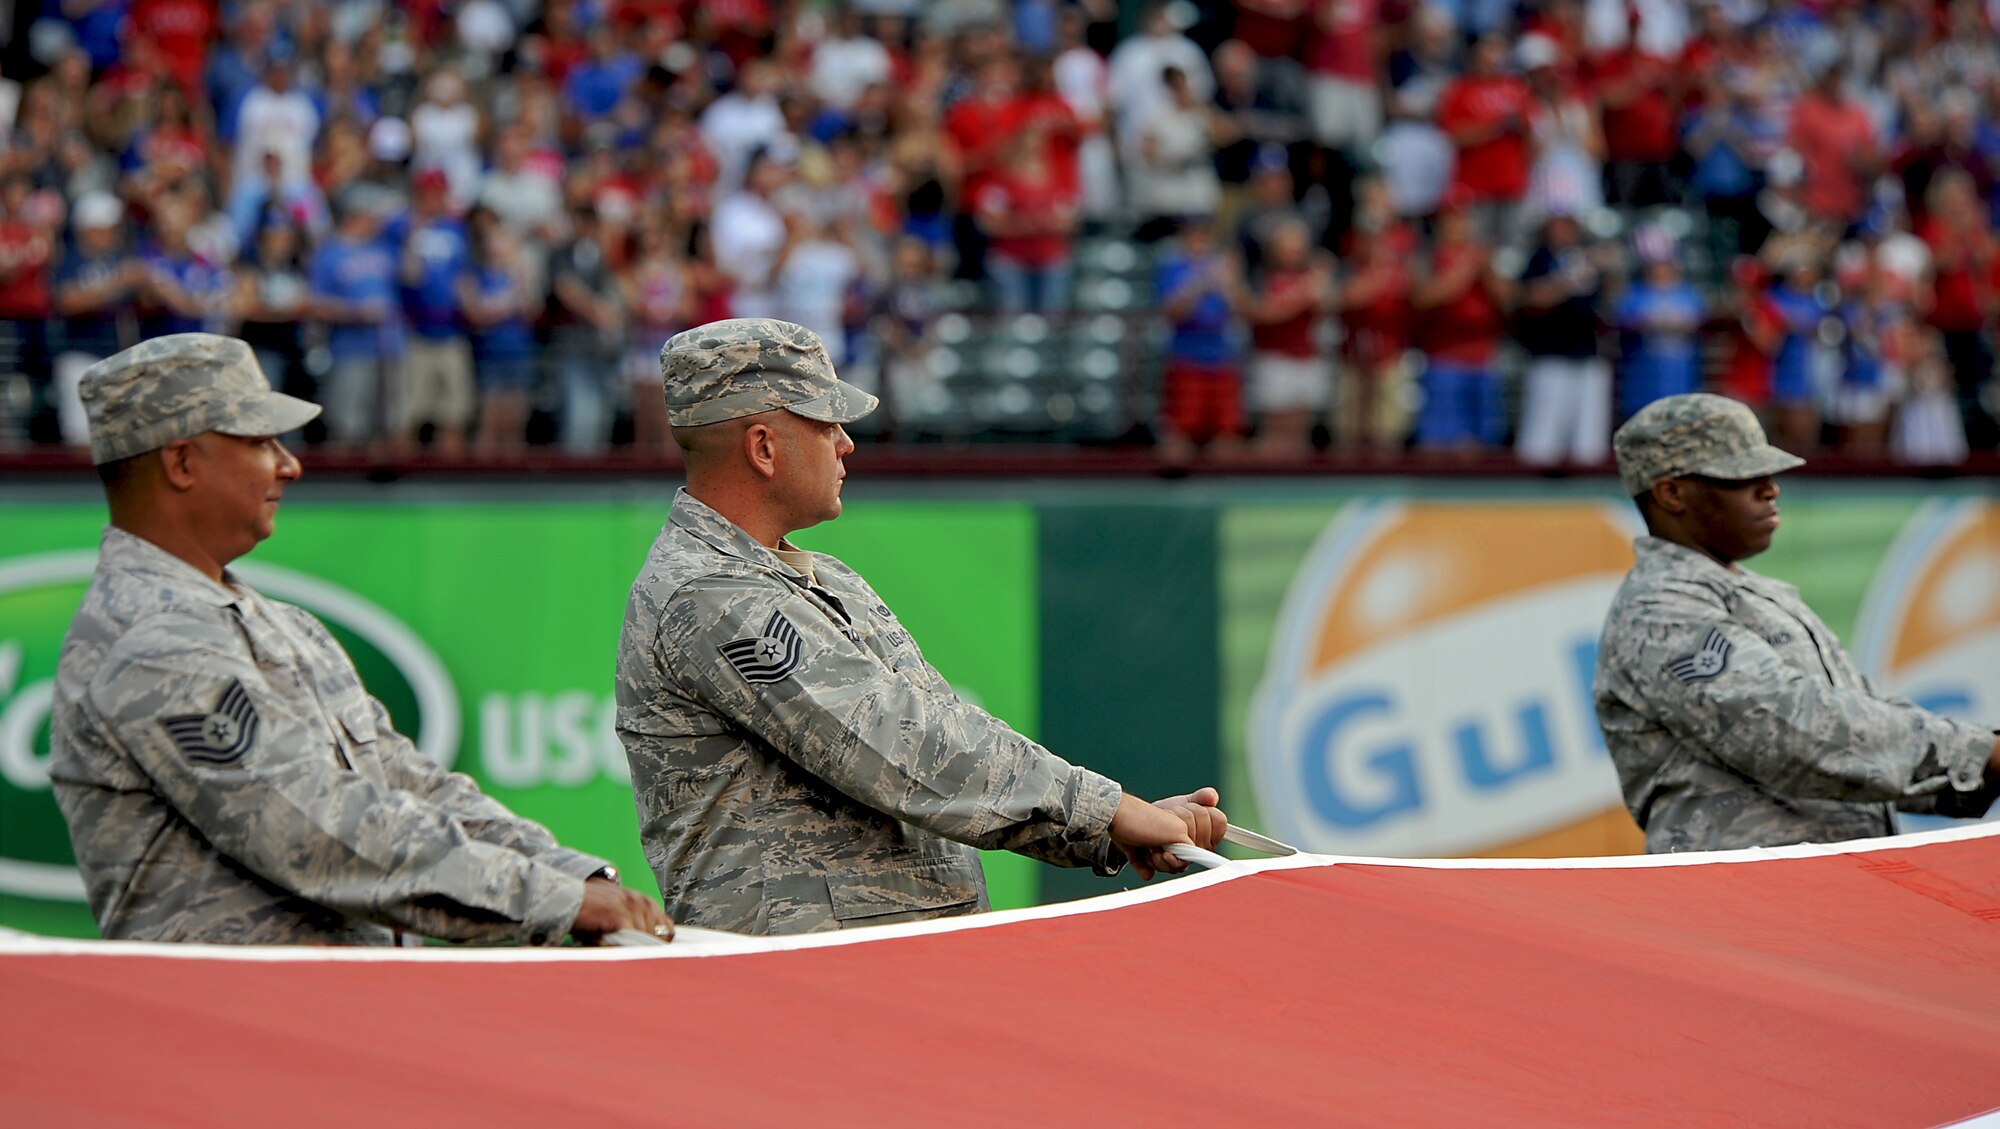 U.S. Air Force Tech. Sgt. Craig Cooper, 7th Civil Engineer Squadron, Dyess Air Force Base, Texas, center, holds an American flag July 4, 2013, at Rangers Ballpark in Arlington, Texas during his stepdaughter’s Air Force enlistment ceremony, prior to a Texas Ranger’s baseball game. (U.S. Air Force photo by Airman 1st Class Peter Thompson/Released)